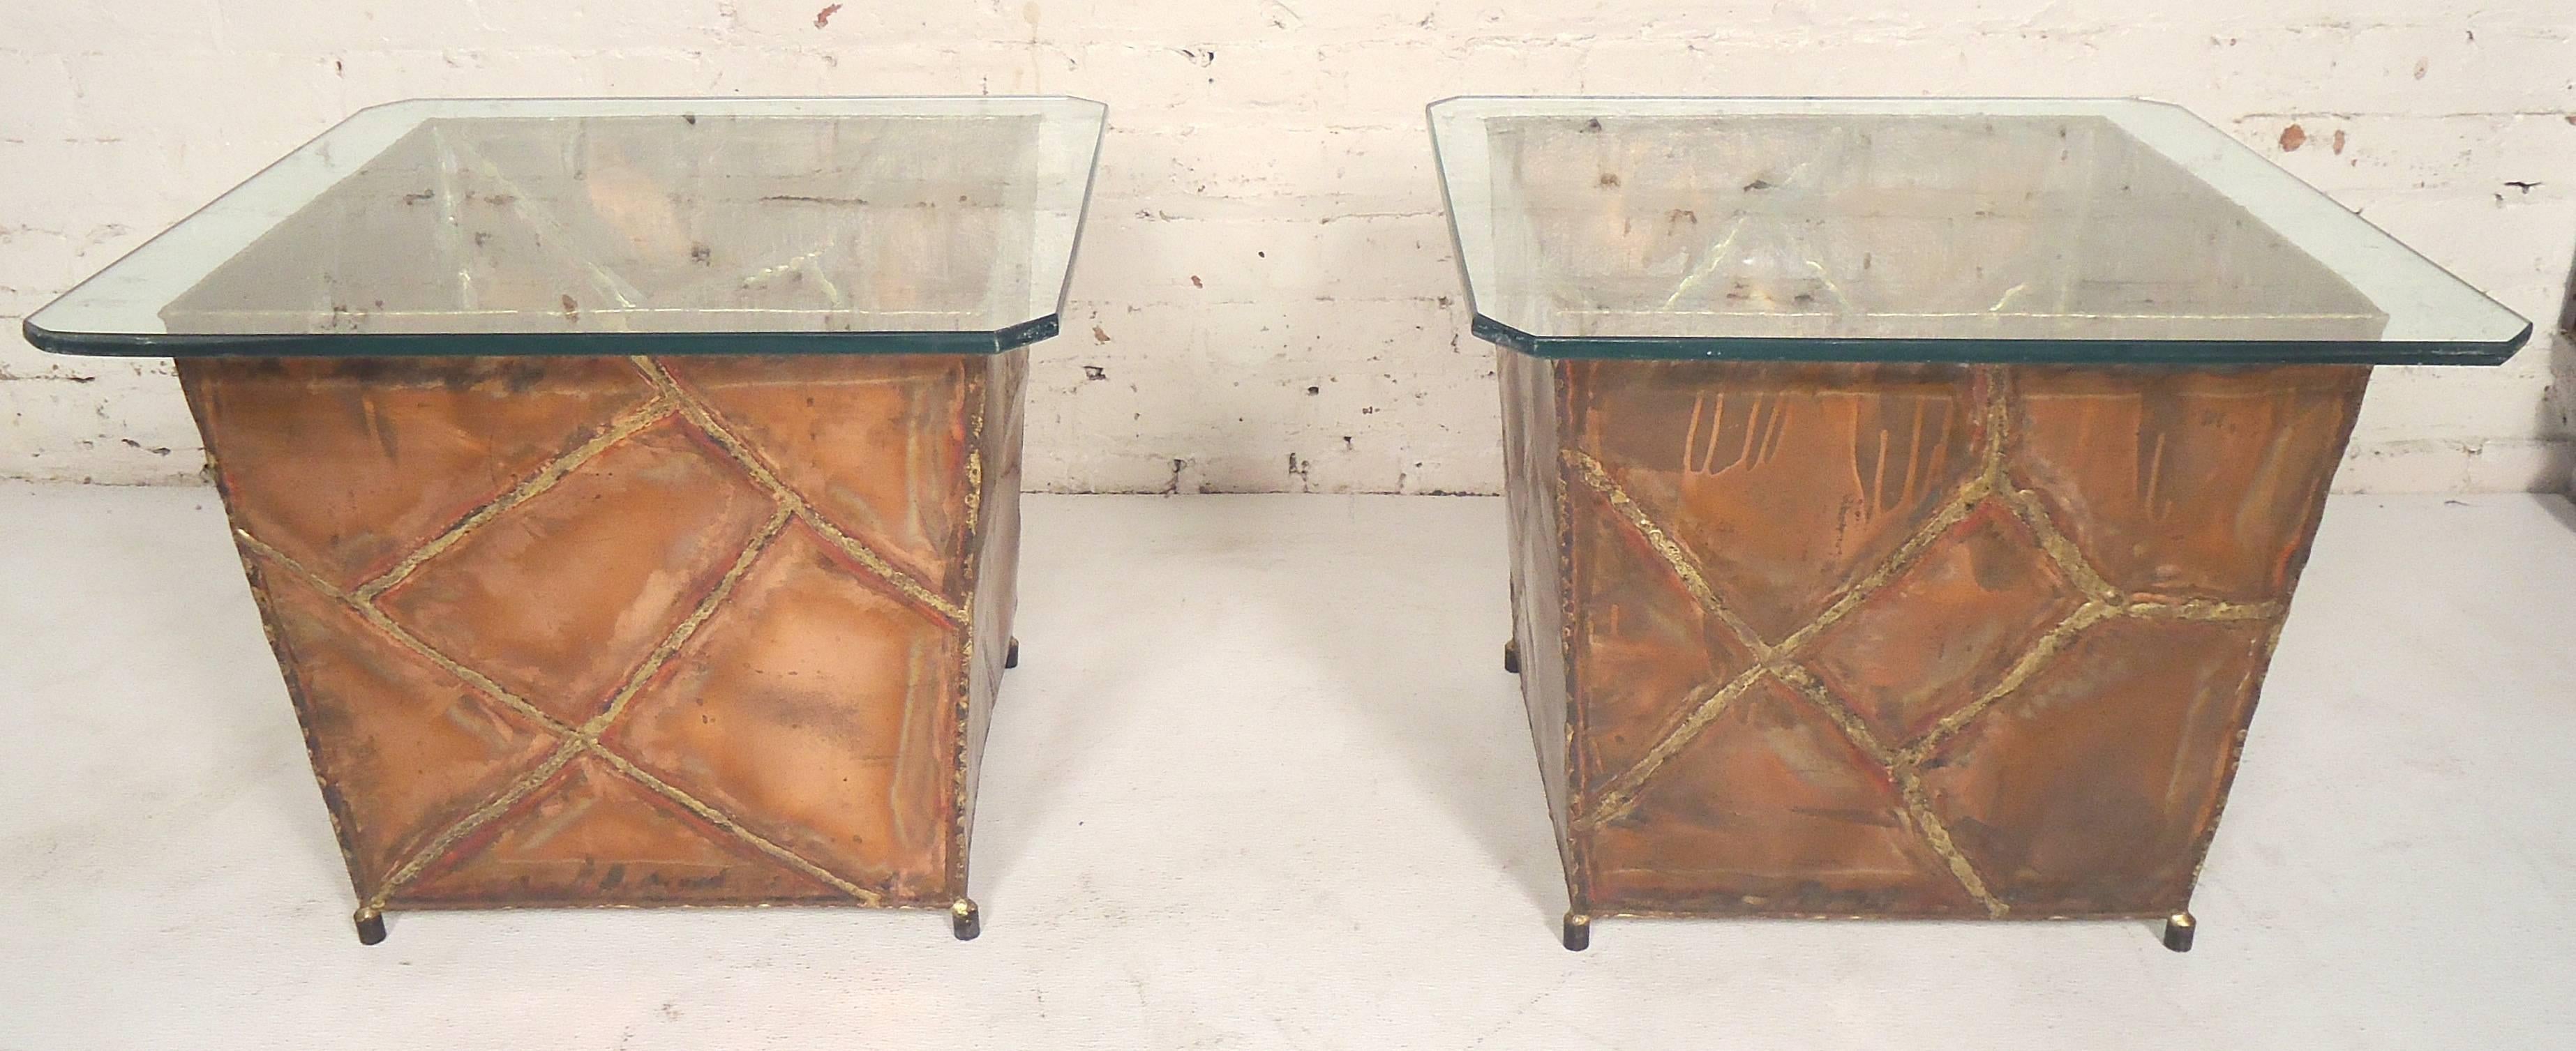 Unique end tables made of copper base and square glass tops. Brutalist style design. Great for living room or patio use.

(Please confirm item location - NY or NJ - with dealer).
 